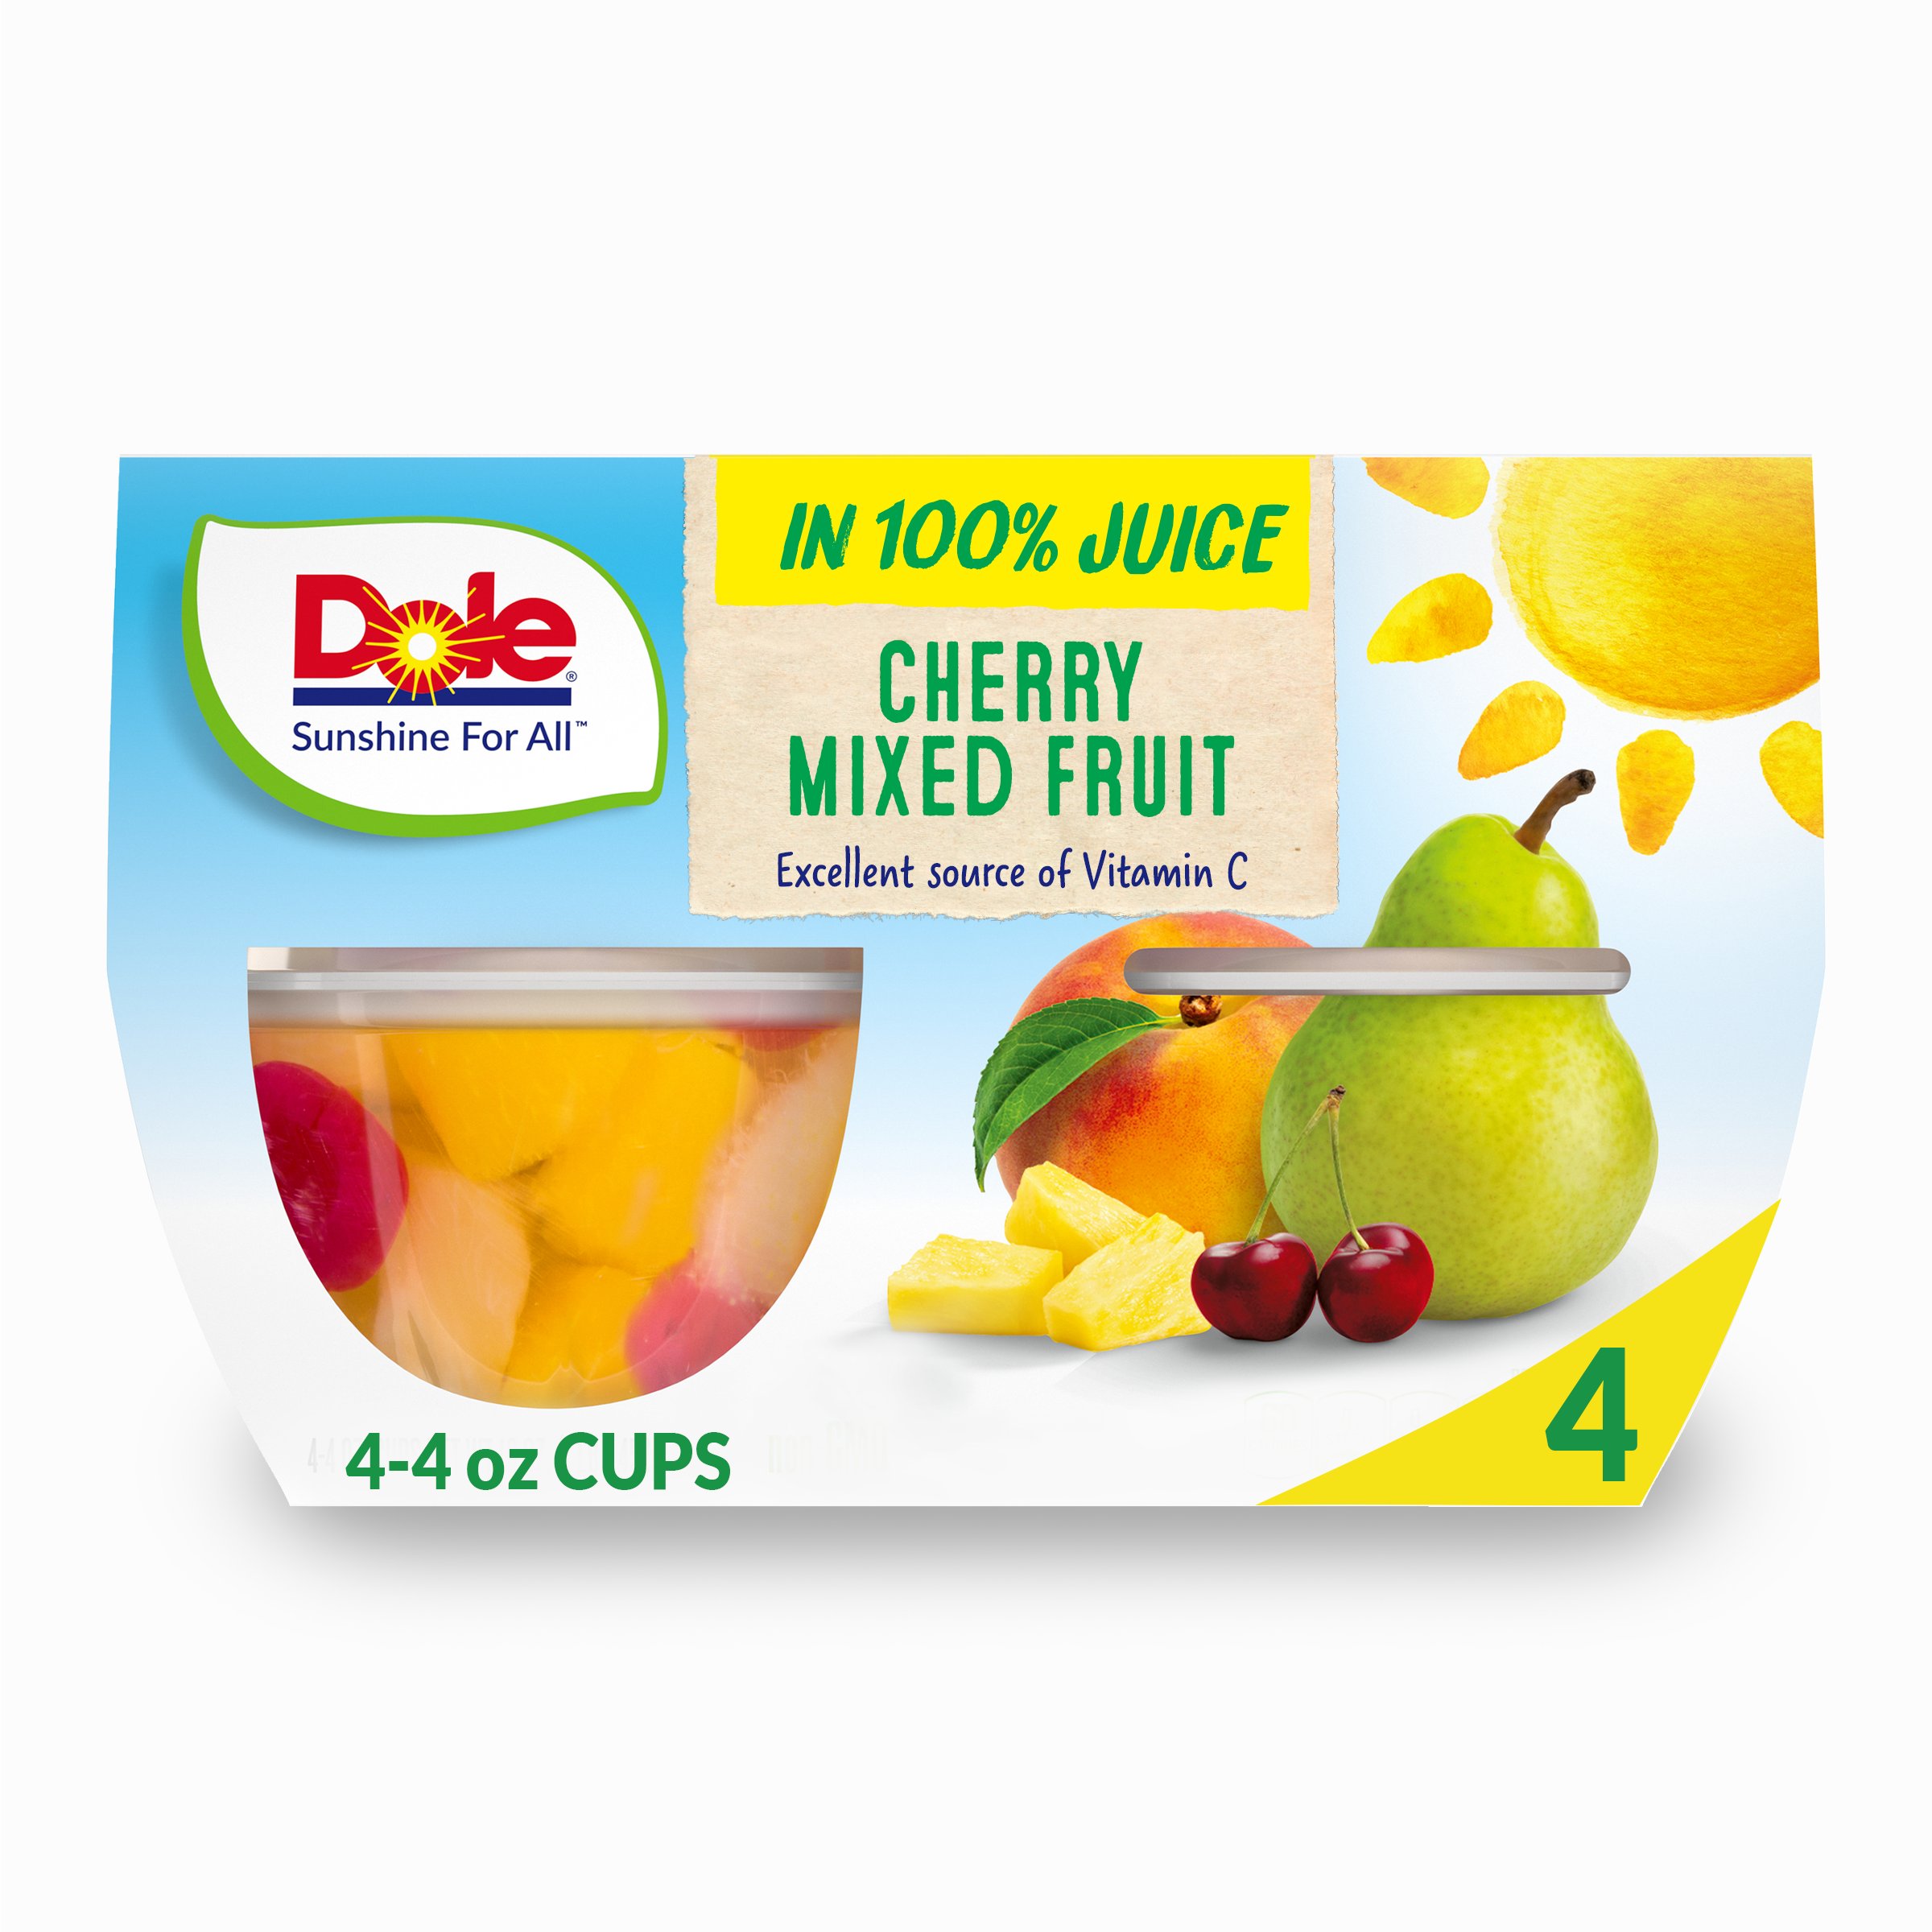 Dole Fruit Bowls - Cherry Mixed Fruit in 100% Juice